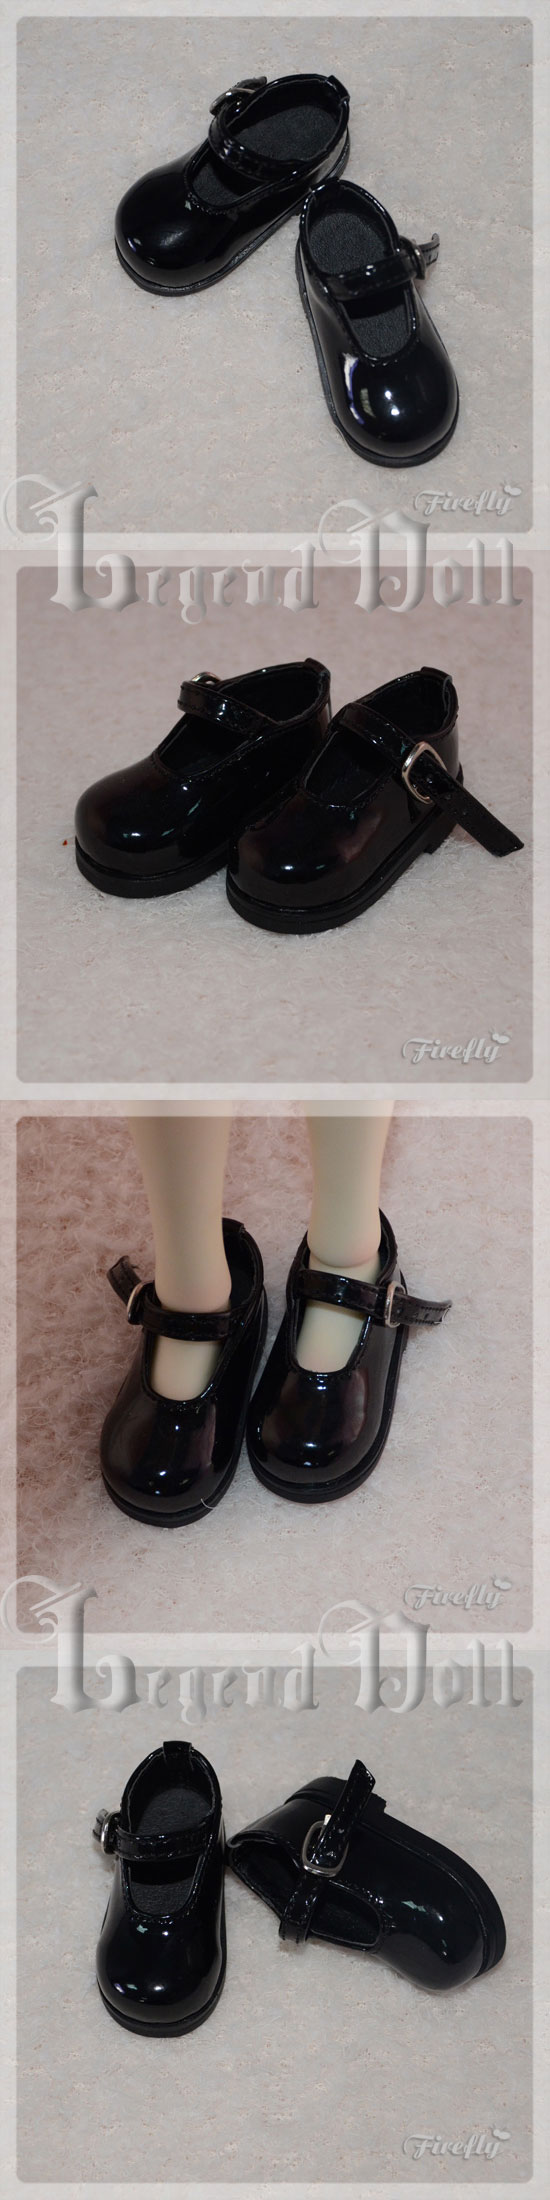 BJD Shoes45-02 for MSD Ball-jointed Doll